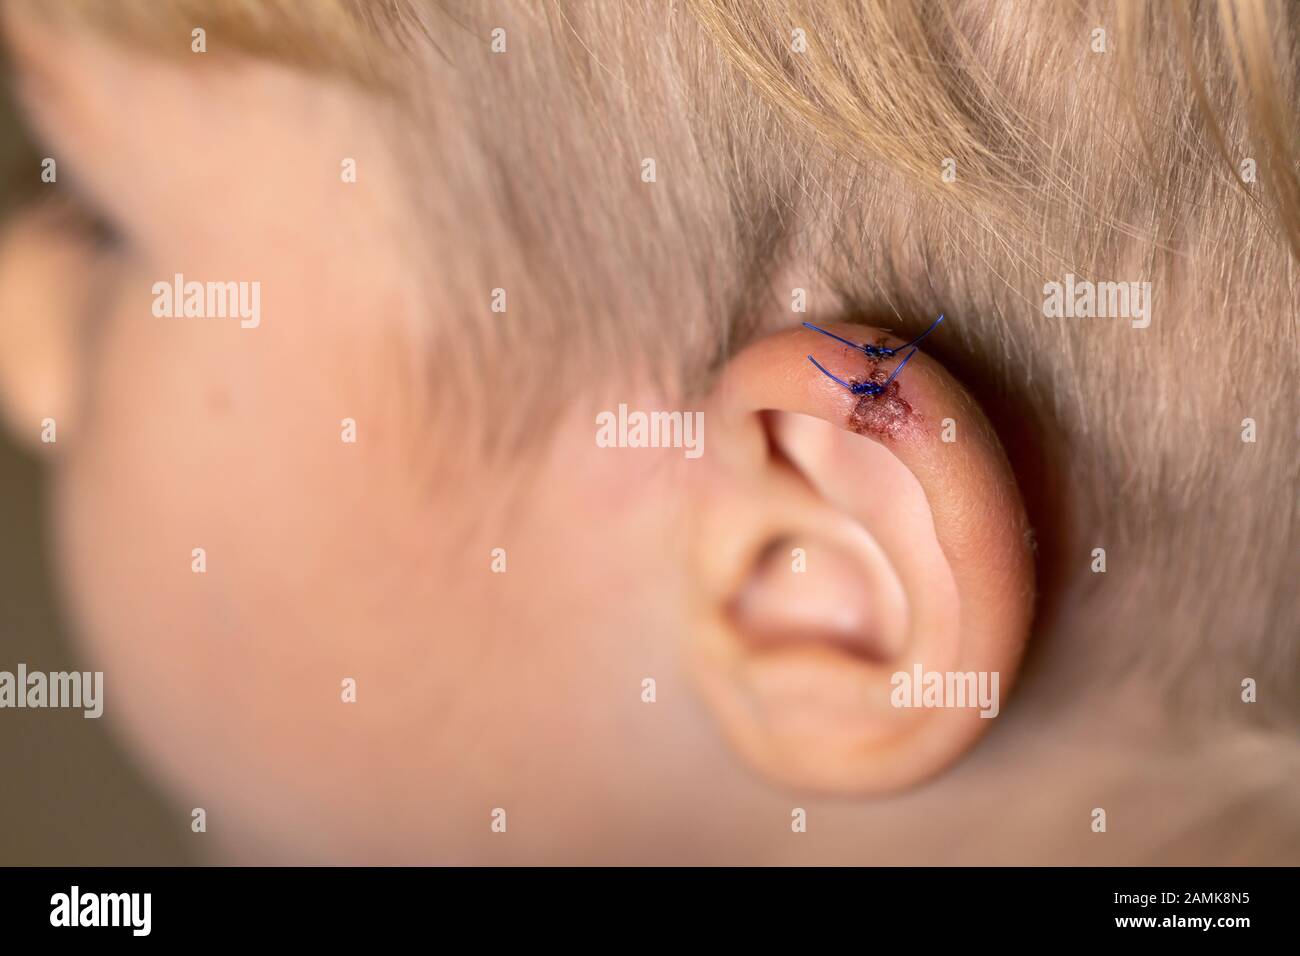 Torn wounds with stitches one child ear. close-up of laceration human ear with suture. wound stitches. Medical, surgical concept. Stock Photo